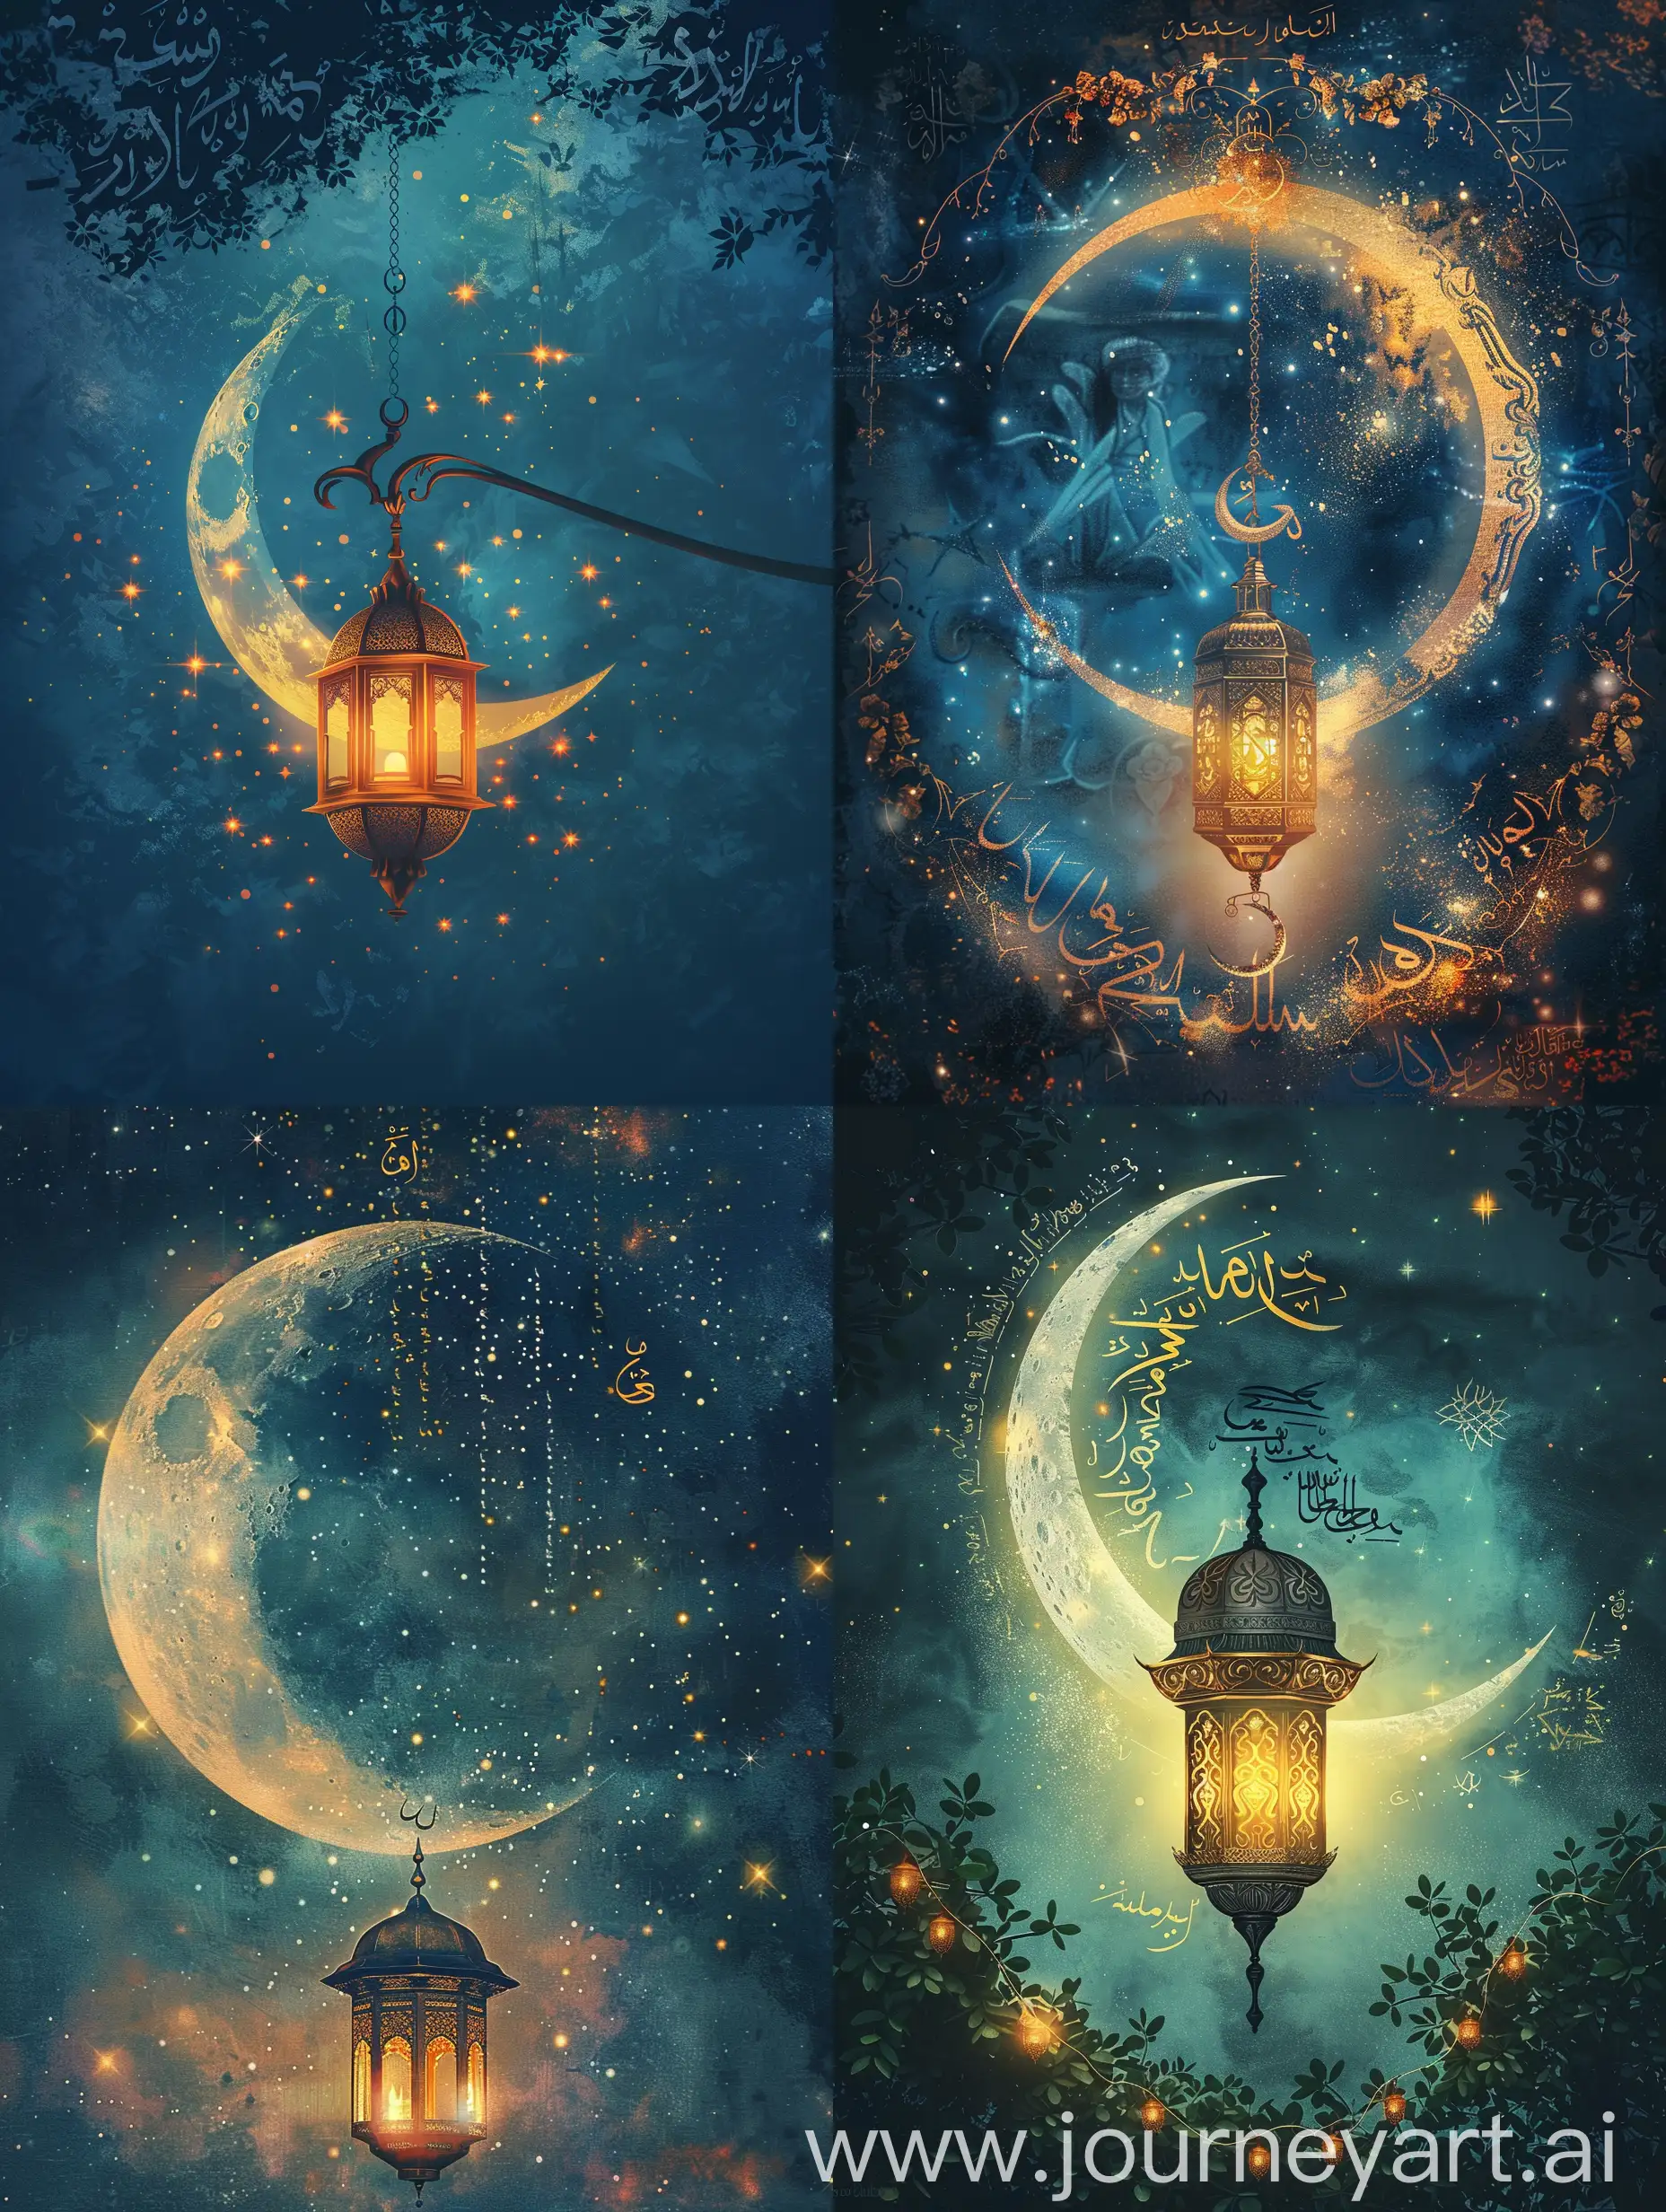 a poster for "laylatul qadr" and "Martyrdom of Imam Ali" , containing a moon cresent and islamic pattenrs, and islamic lantern. also some stars in the sky
dark and sad theme